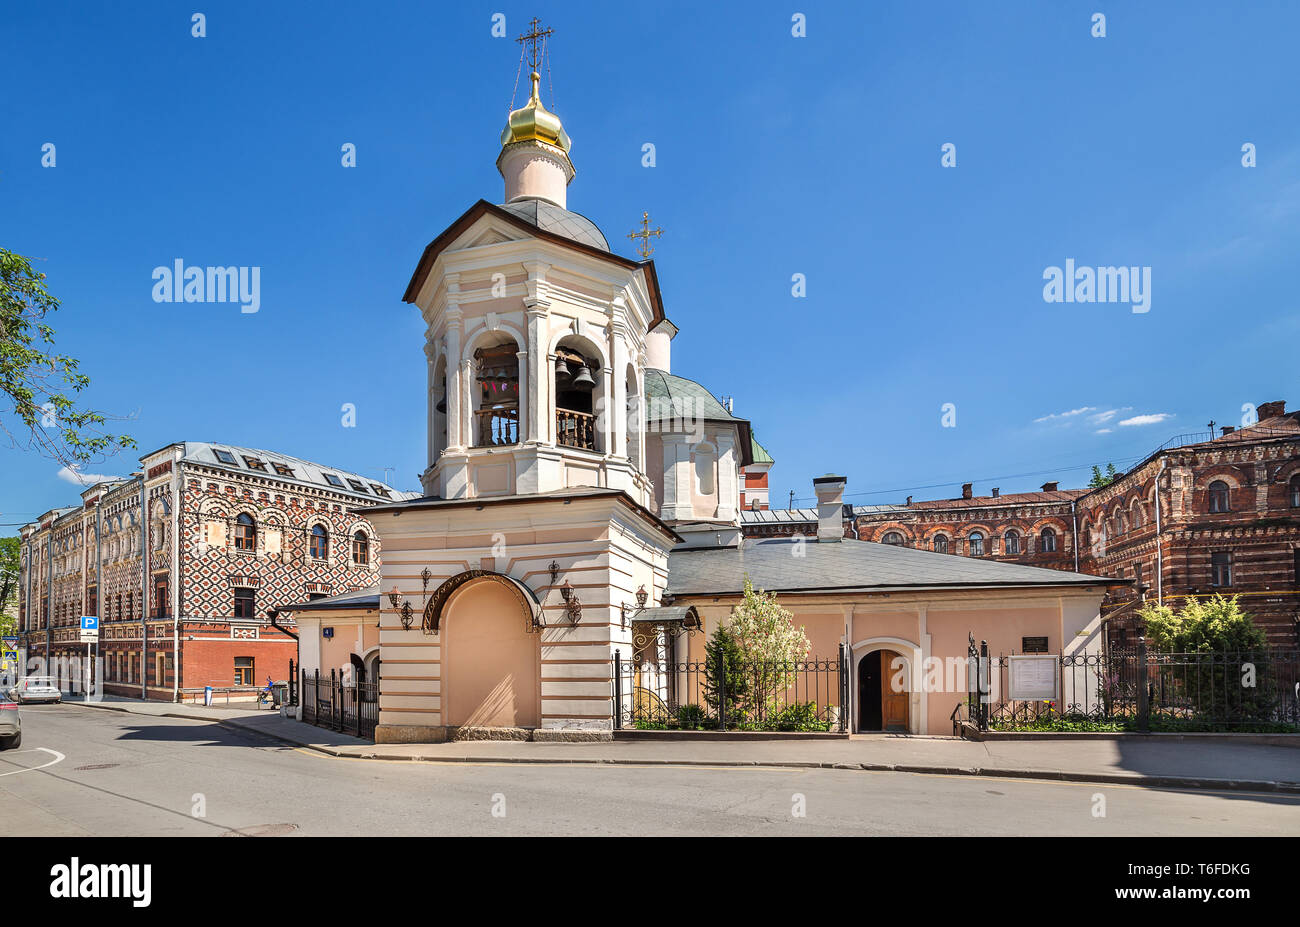 Orthodox church in Moscow, Russia. Stock Photo